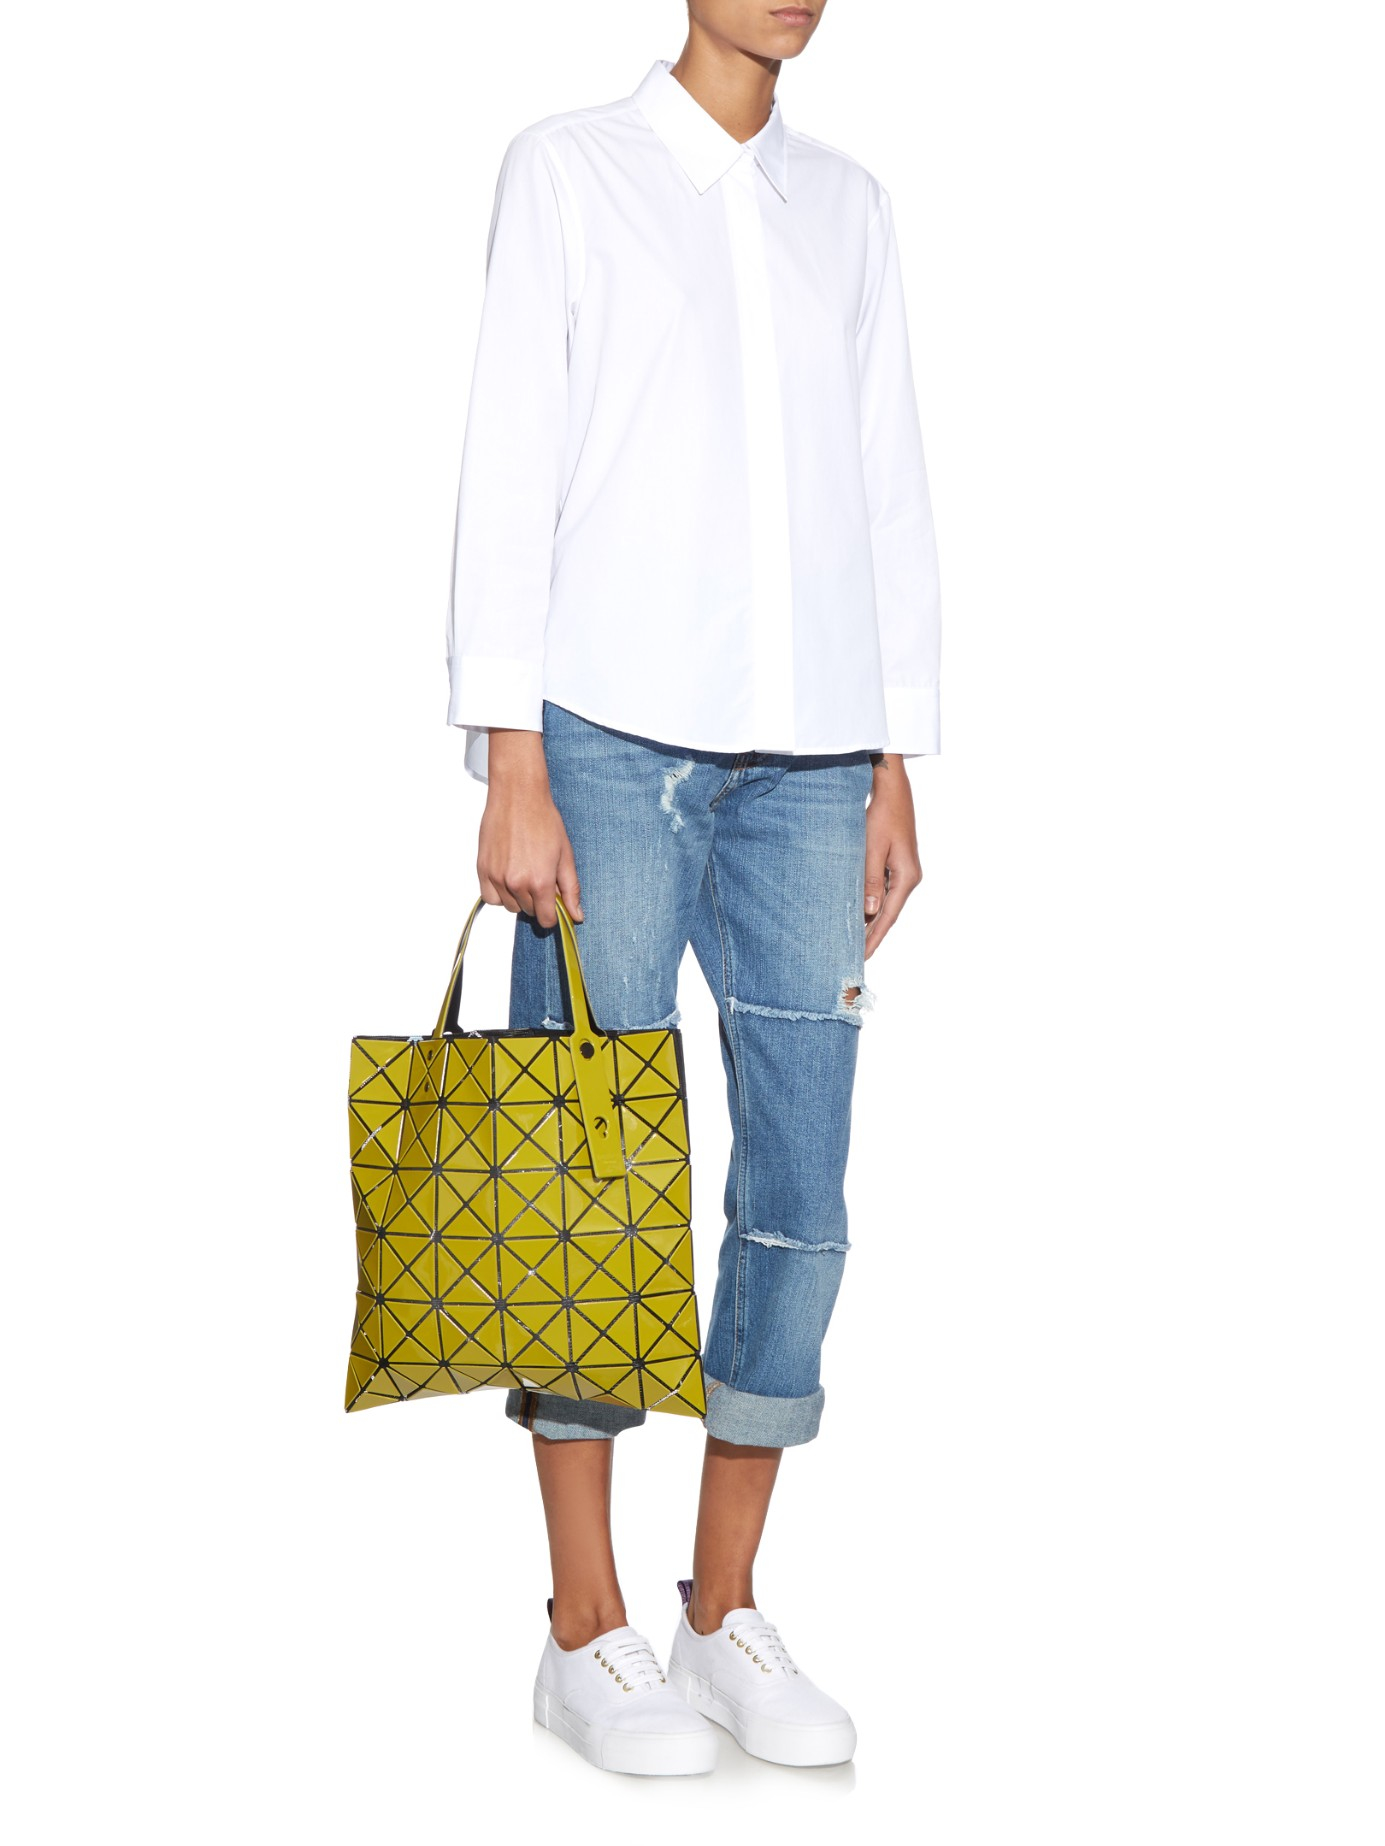 Lyst - Bao Bao Issey Miyake Lucent Basic Tote in Yellow